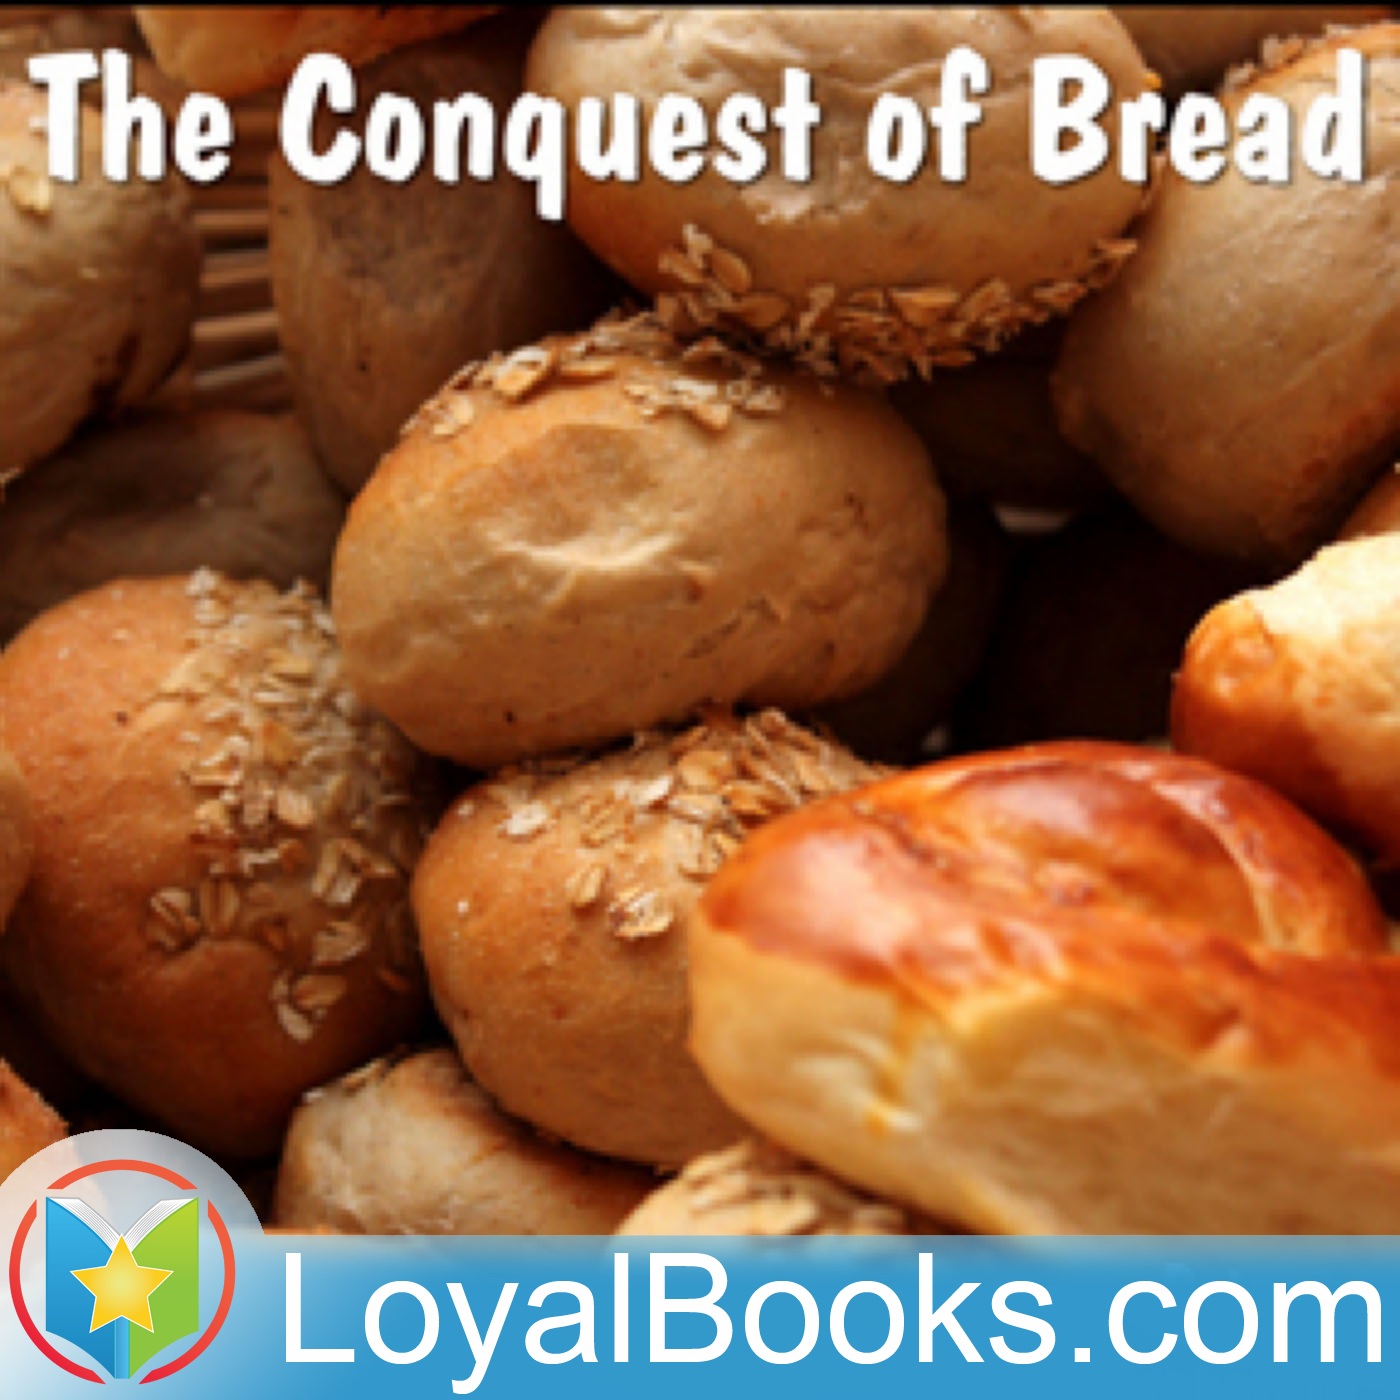 The Conquest of bread by Peter Kropotkin